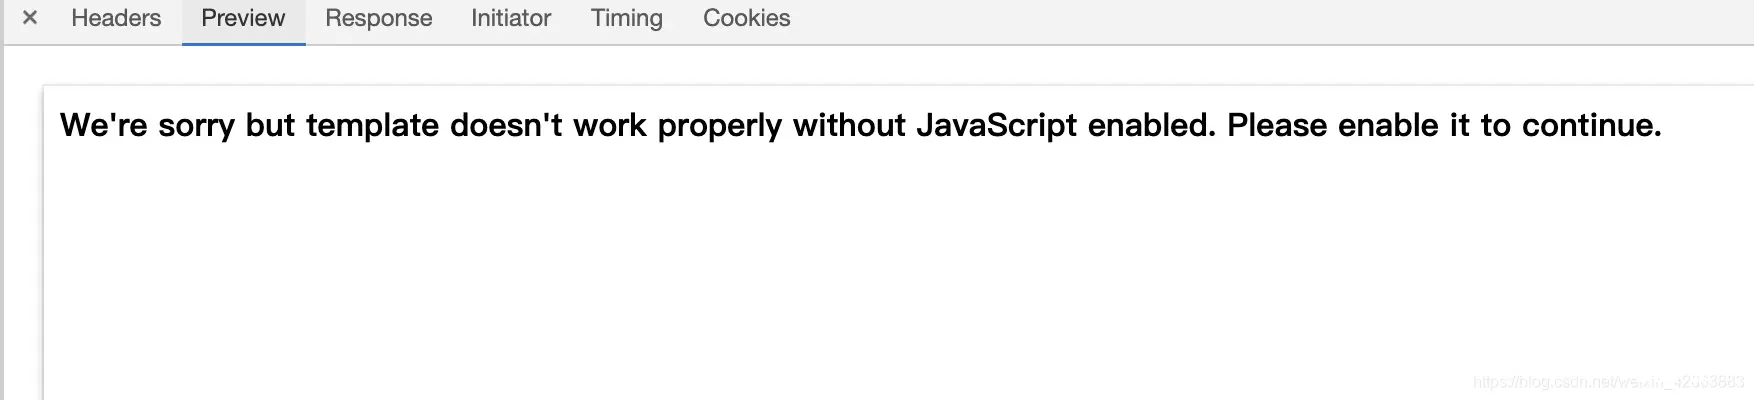 We’re sorry but XXX doesn’t work properly without JavaScript enabled（解决方案汇总）